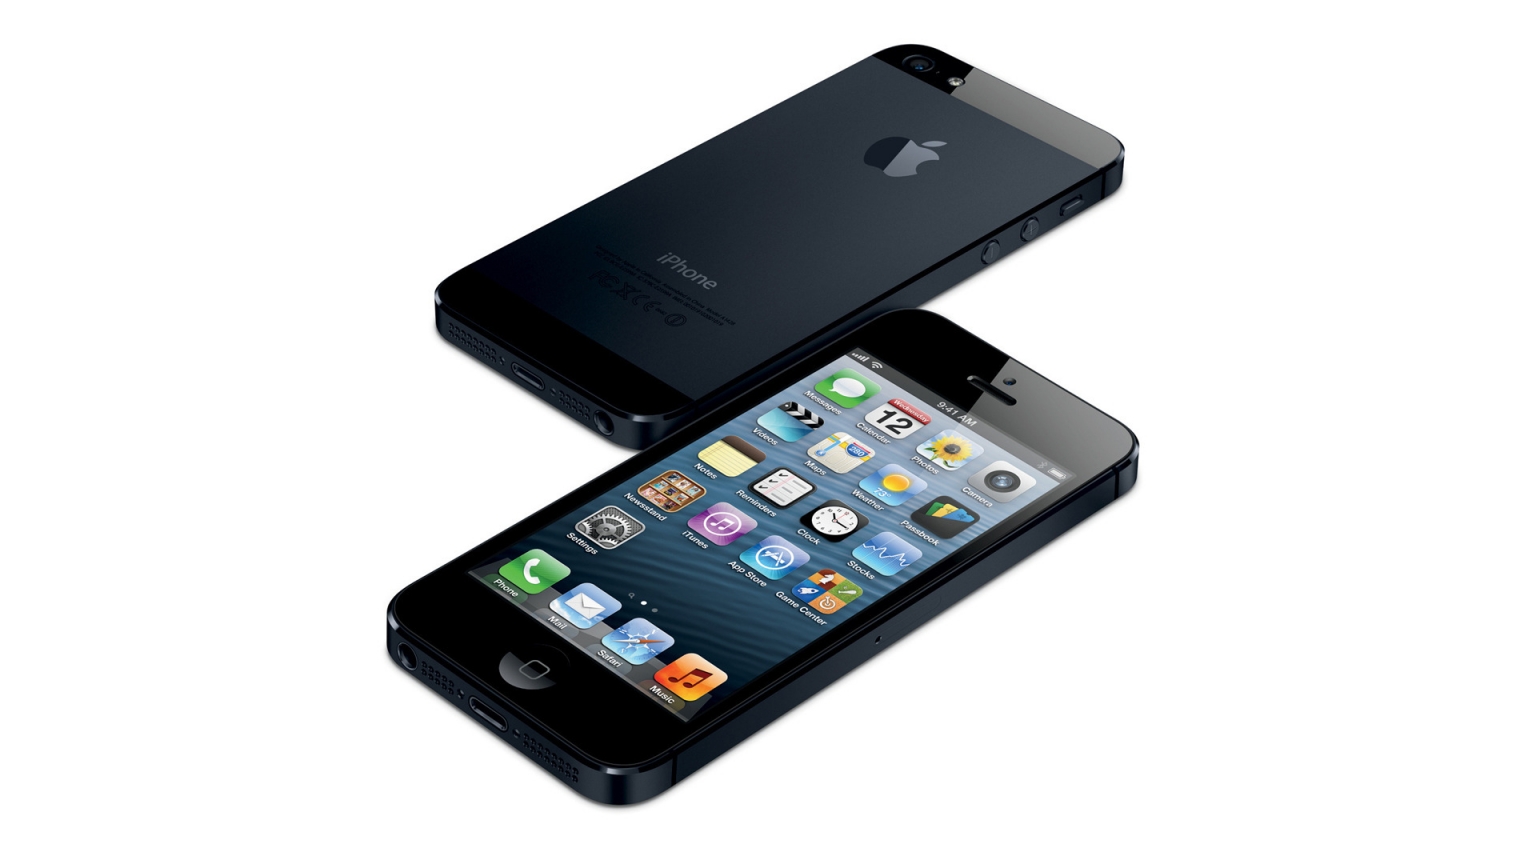 Black iPhone 5 for 1536 x 864 HDTV resolution